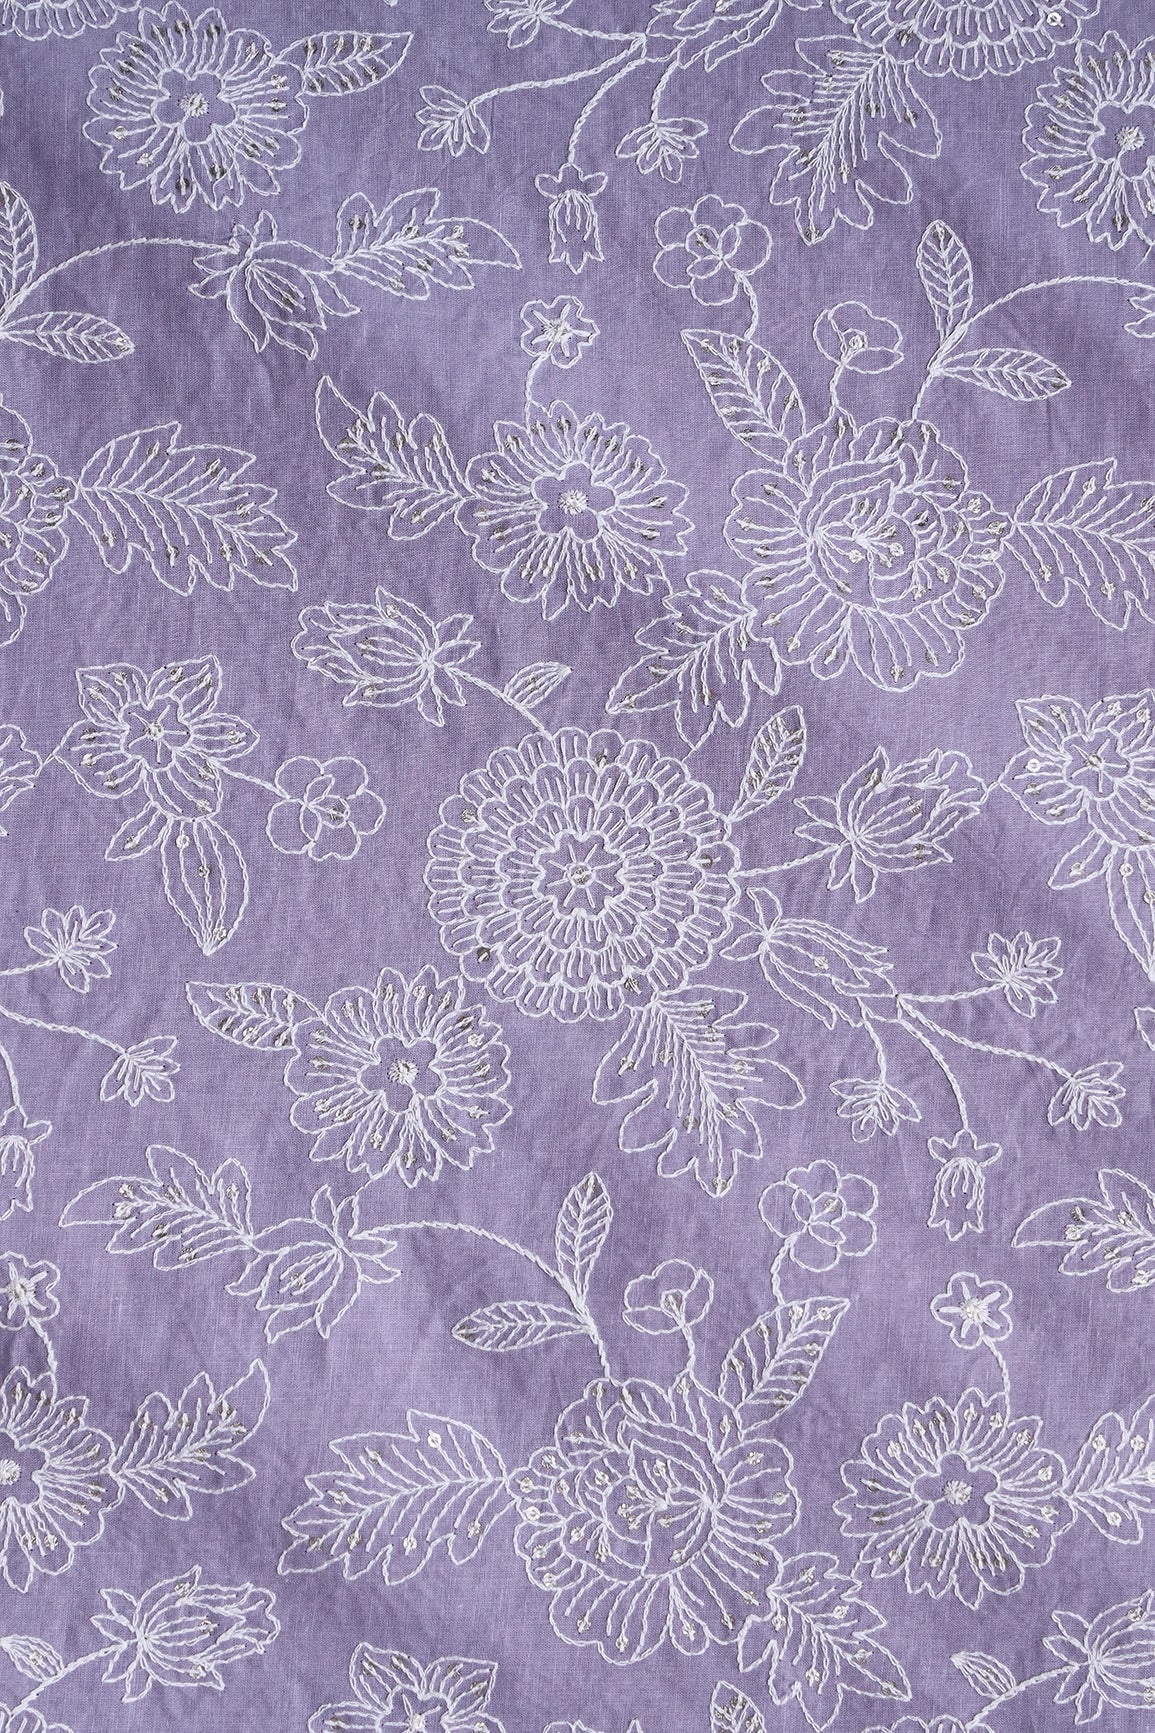 White Thread With Gold Sequins Heavy Floral Embroidery Work On Gray Purple Cotton Fabric